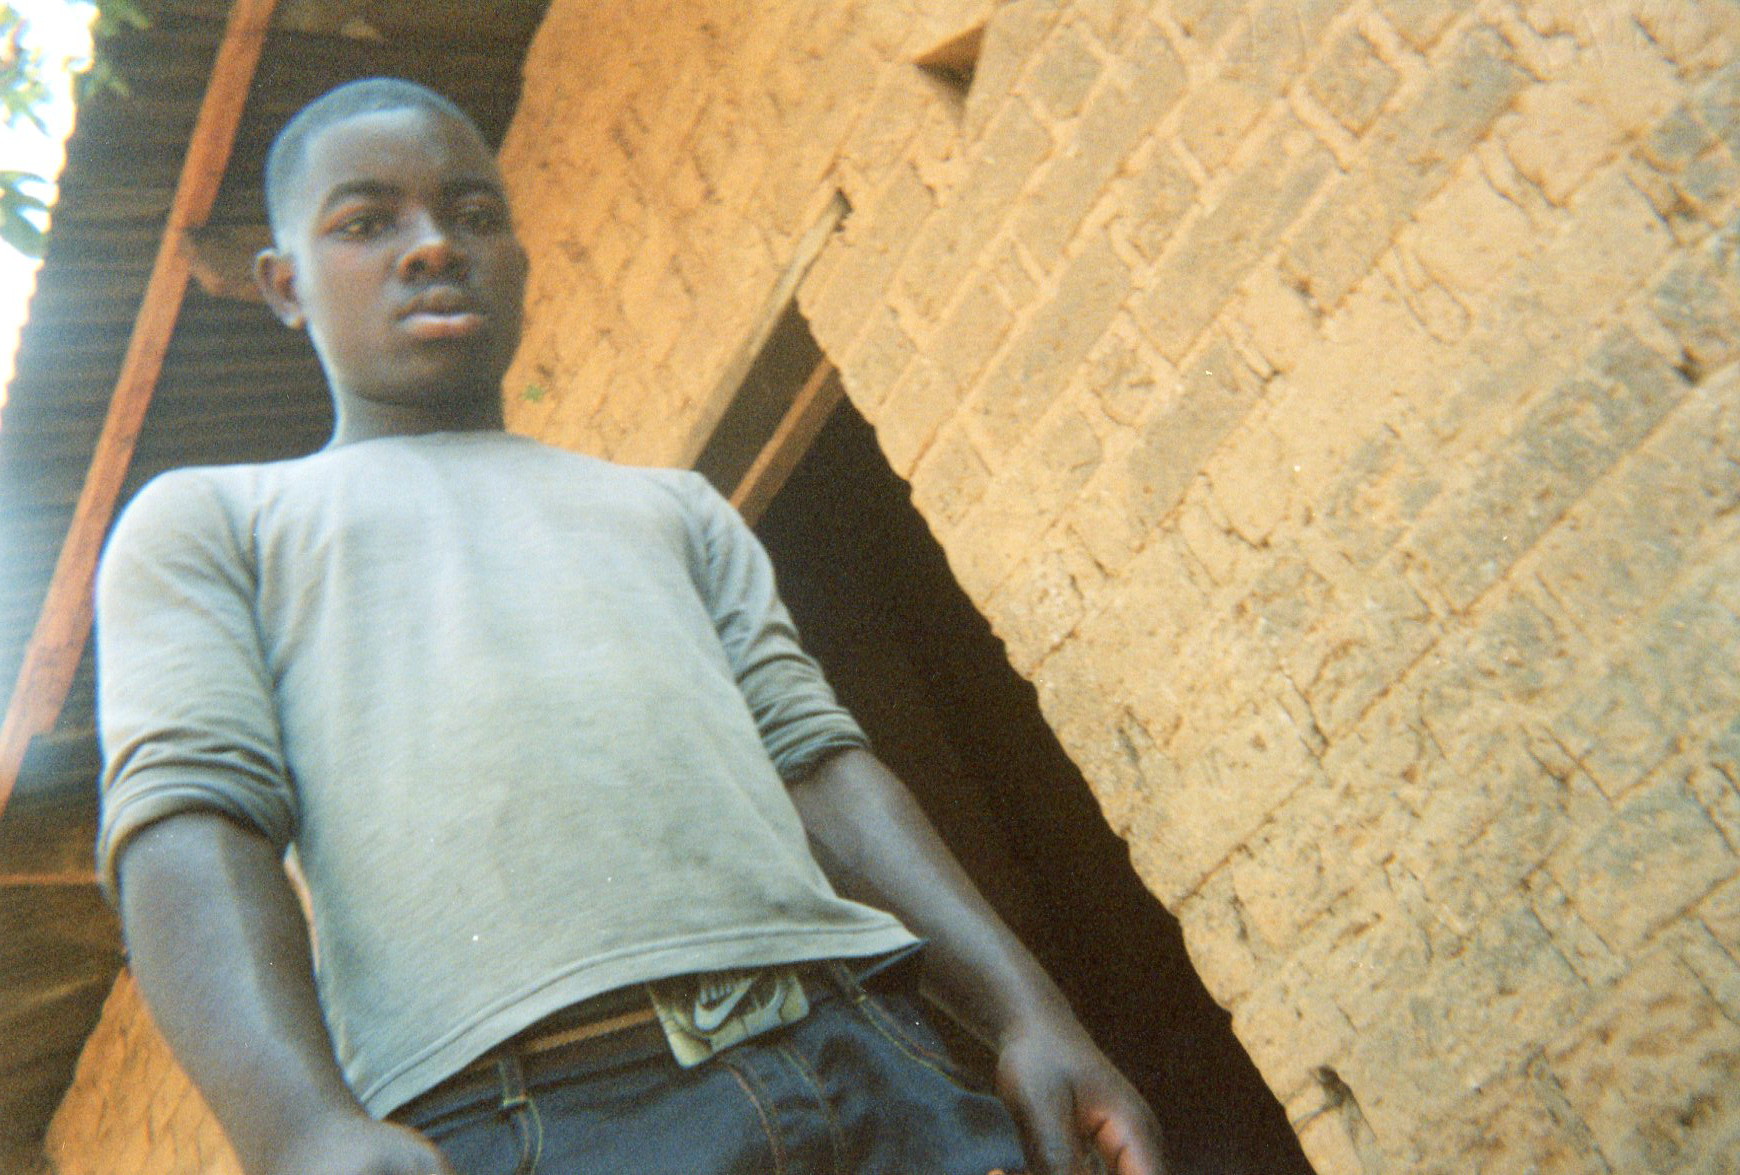  This boy ex-child soldier helped me a lot during this sad period of my life while I was in the armed groups.   